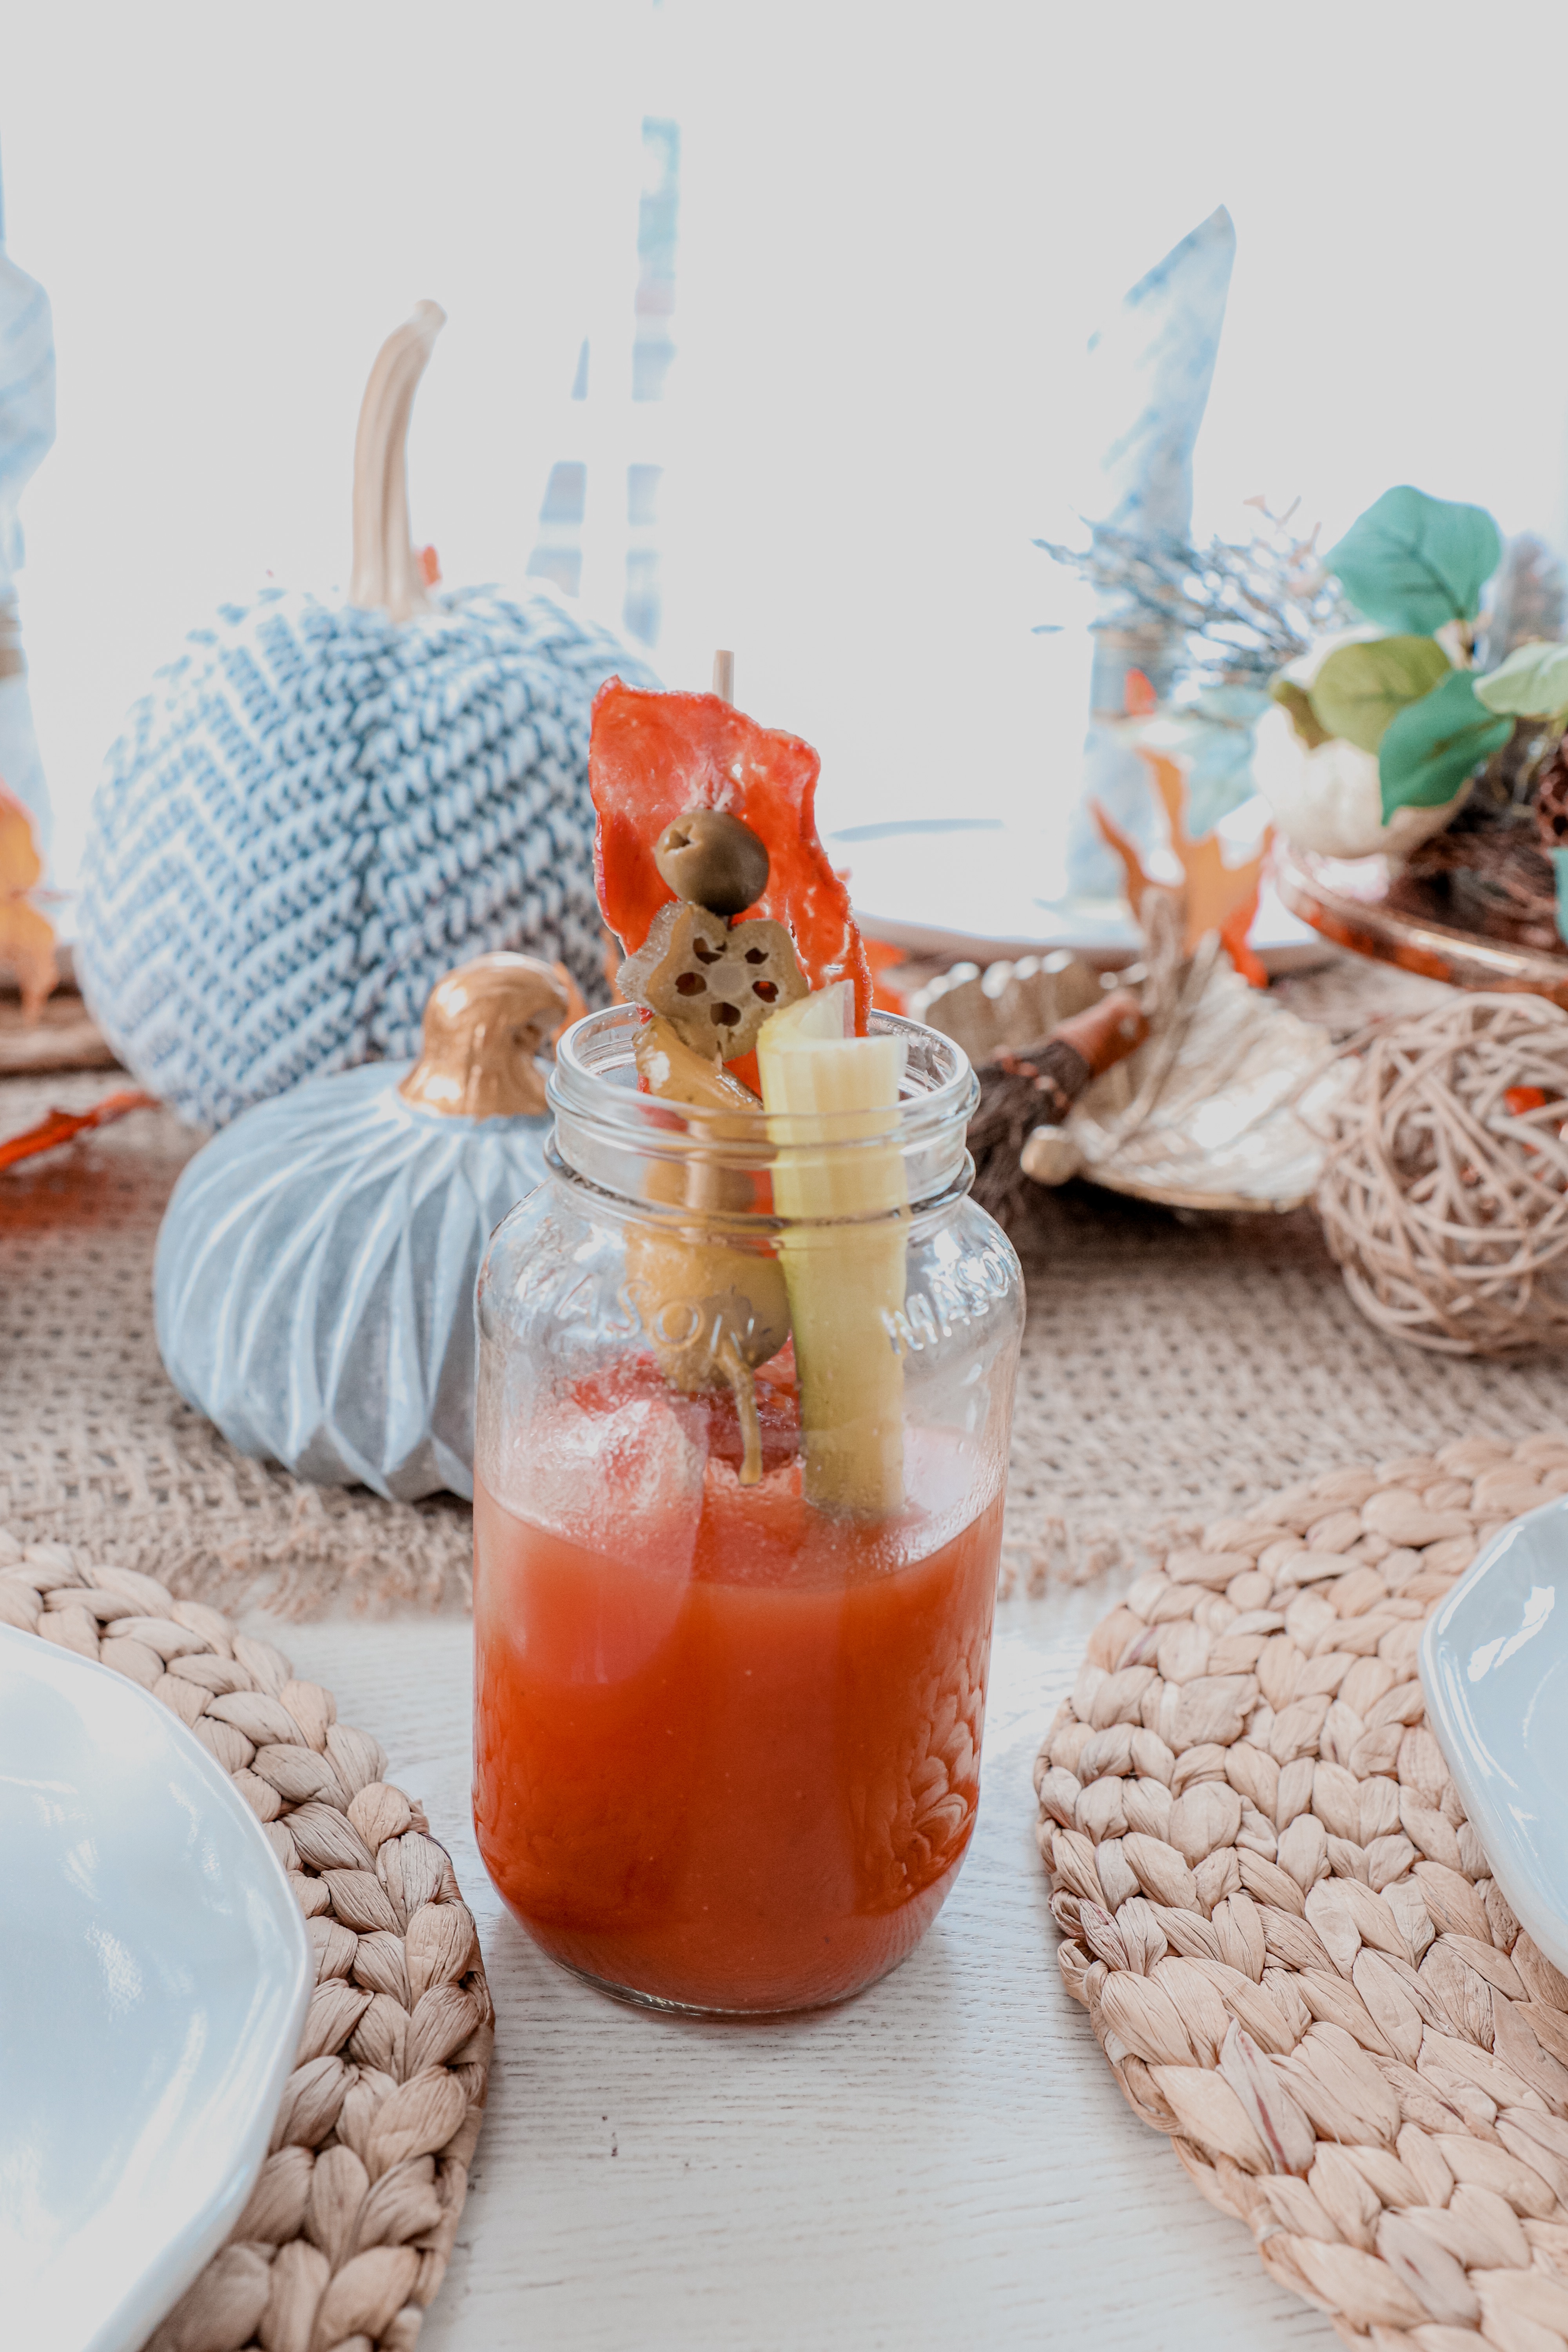 Bloody Maria: A Tequila Bloody Mary Recipe - Nashville Wifestyles; I love a good bloody mary. I love ordering them for brunch and they’re the best spicy cocktail. Luckily, I can make a bloody mary at home in less than 3 minutes. I recently discovered the most delicious bloody mary mixer that not only makes brunch time easier but is made with all natural ingredients. I substituted tequila for my bloody mary and it blew me away how delicious it was. So obviously I wanted to share with you guys this Tequila Bloody Mary Recipe. Click to read! Tequila Bloody Mary Recipe